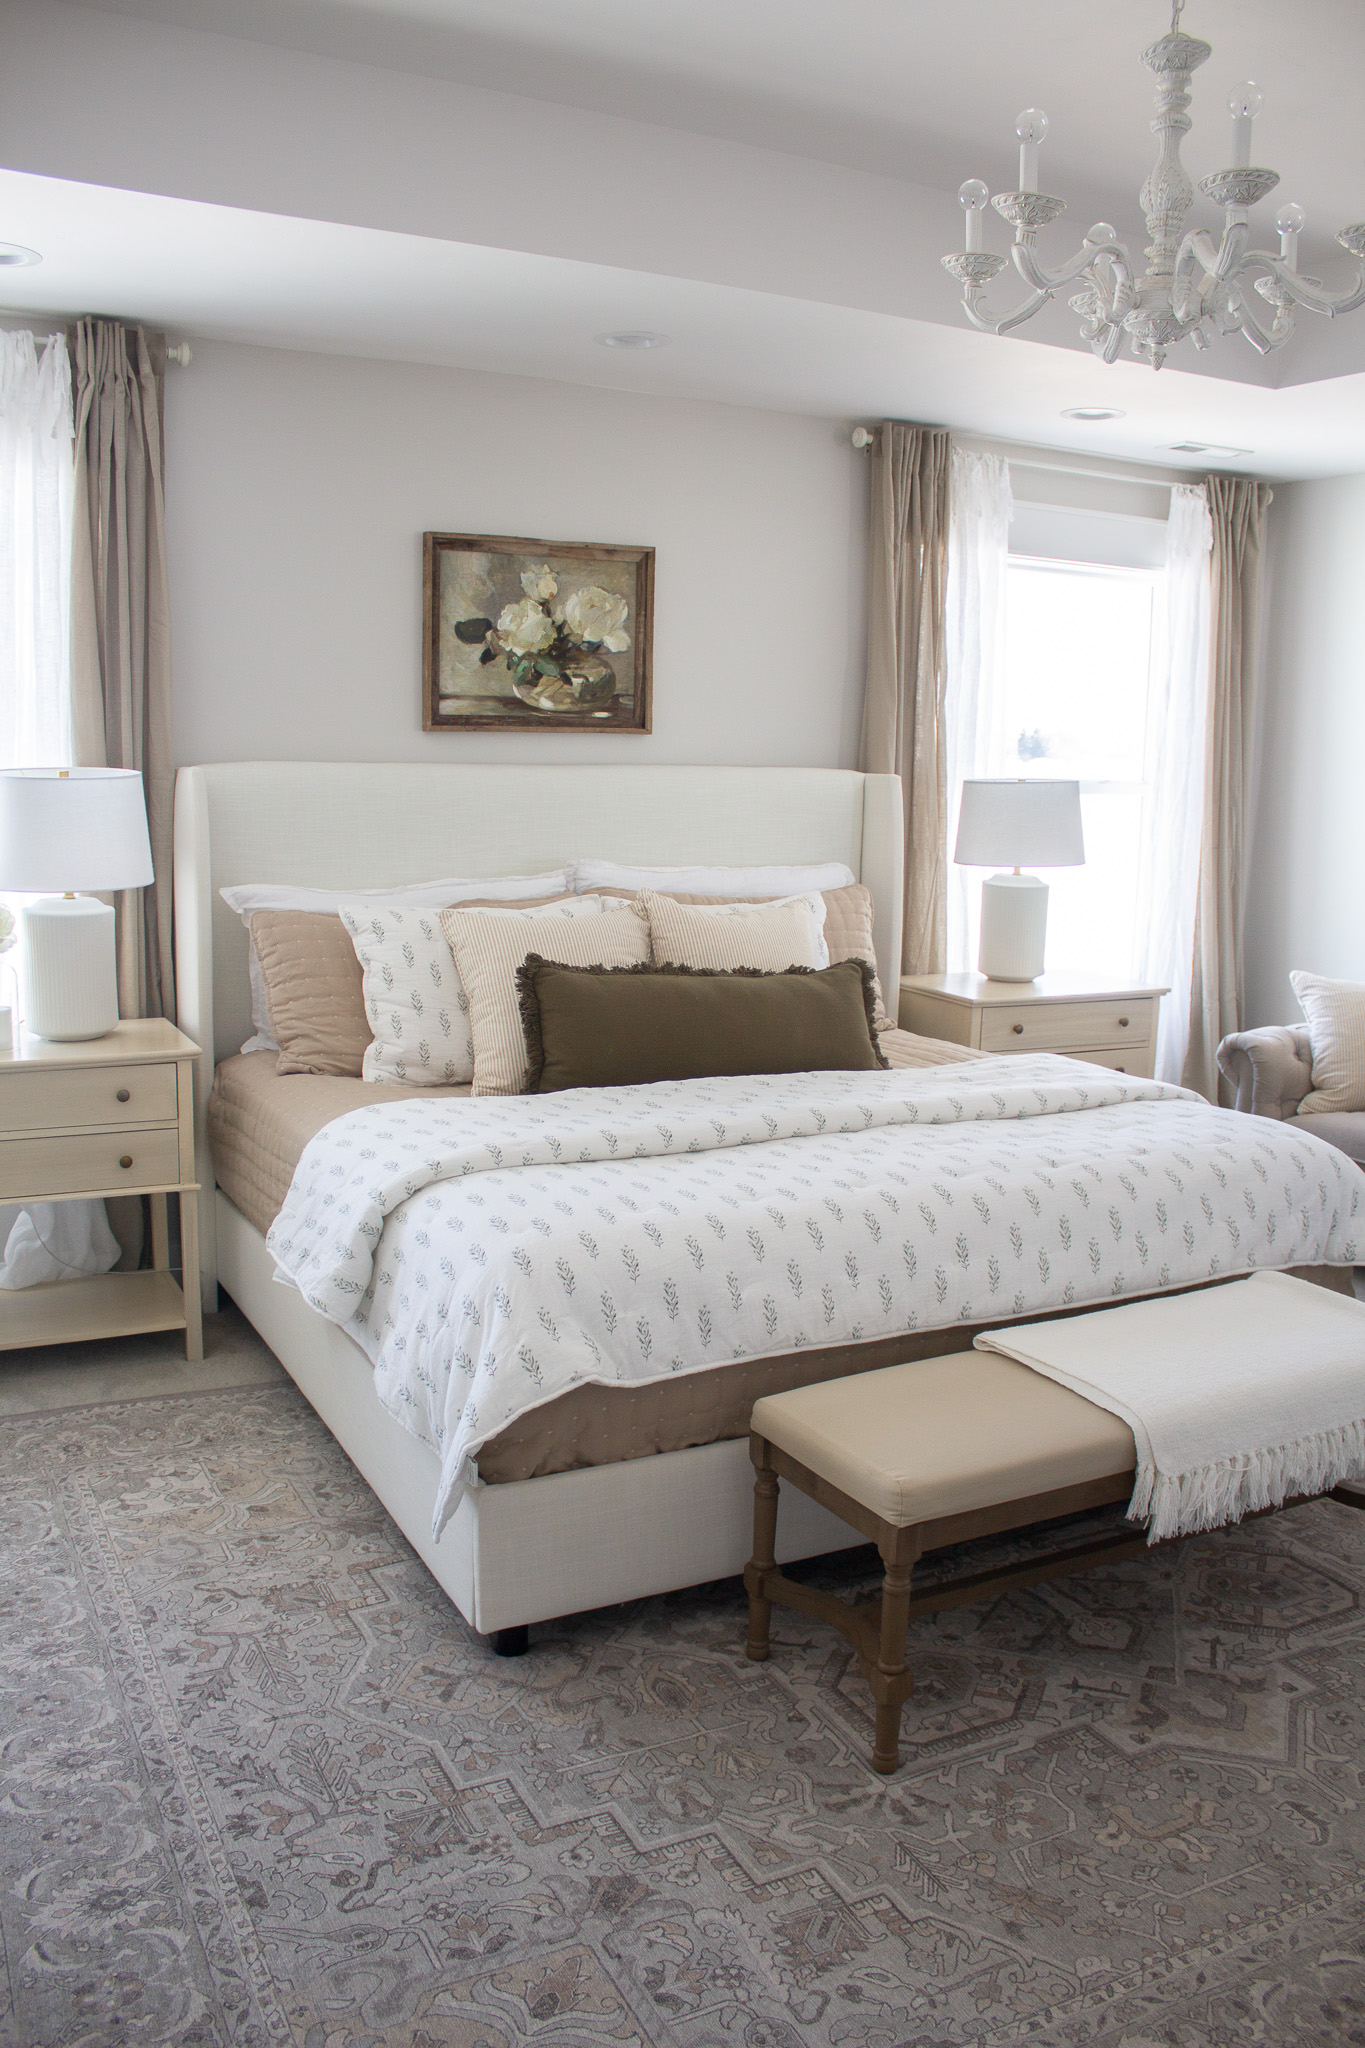 Neutral and Cozy Primary Bedroom Refresh
neutral bedding neutral rug
block print bedding